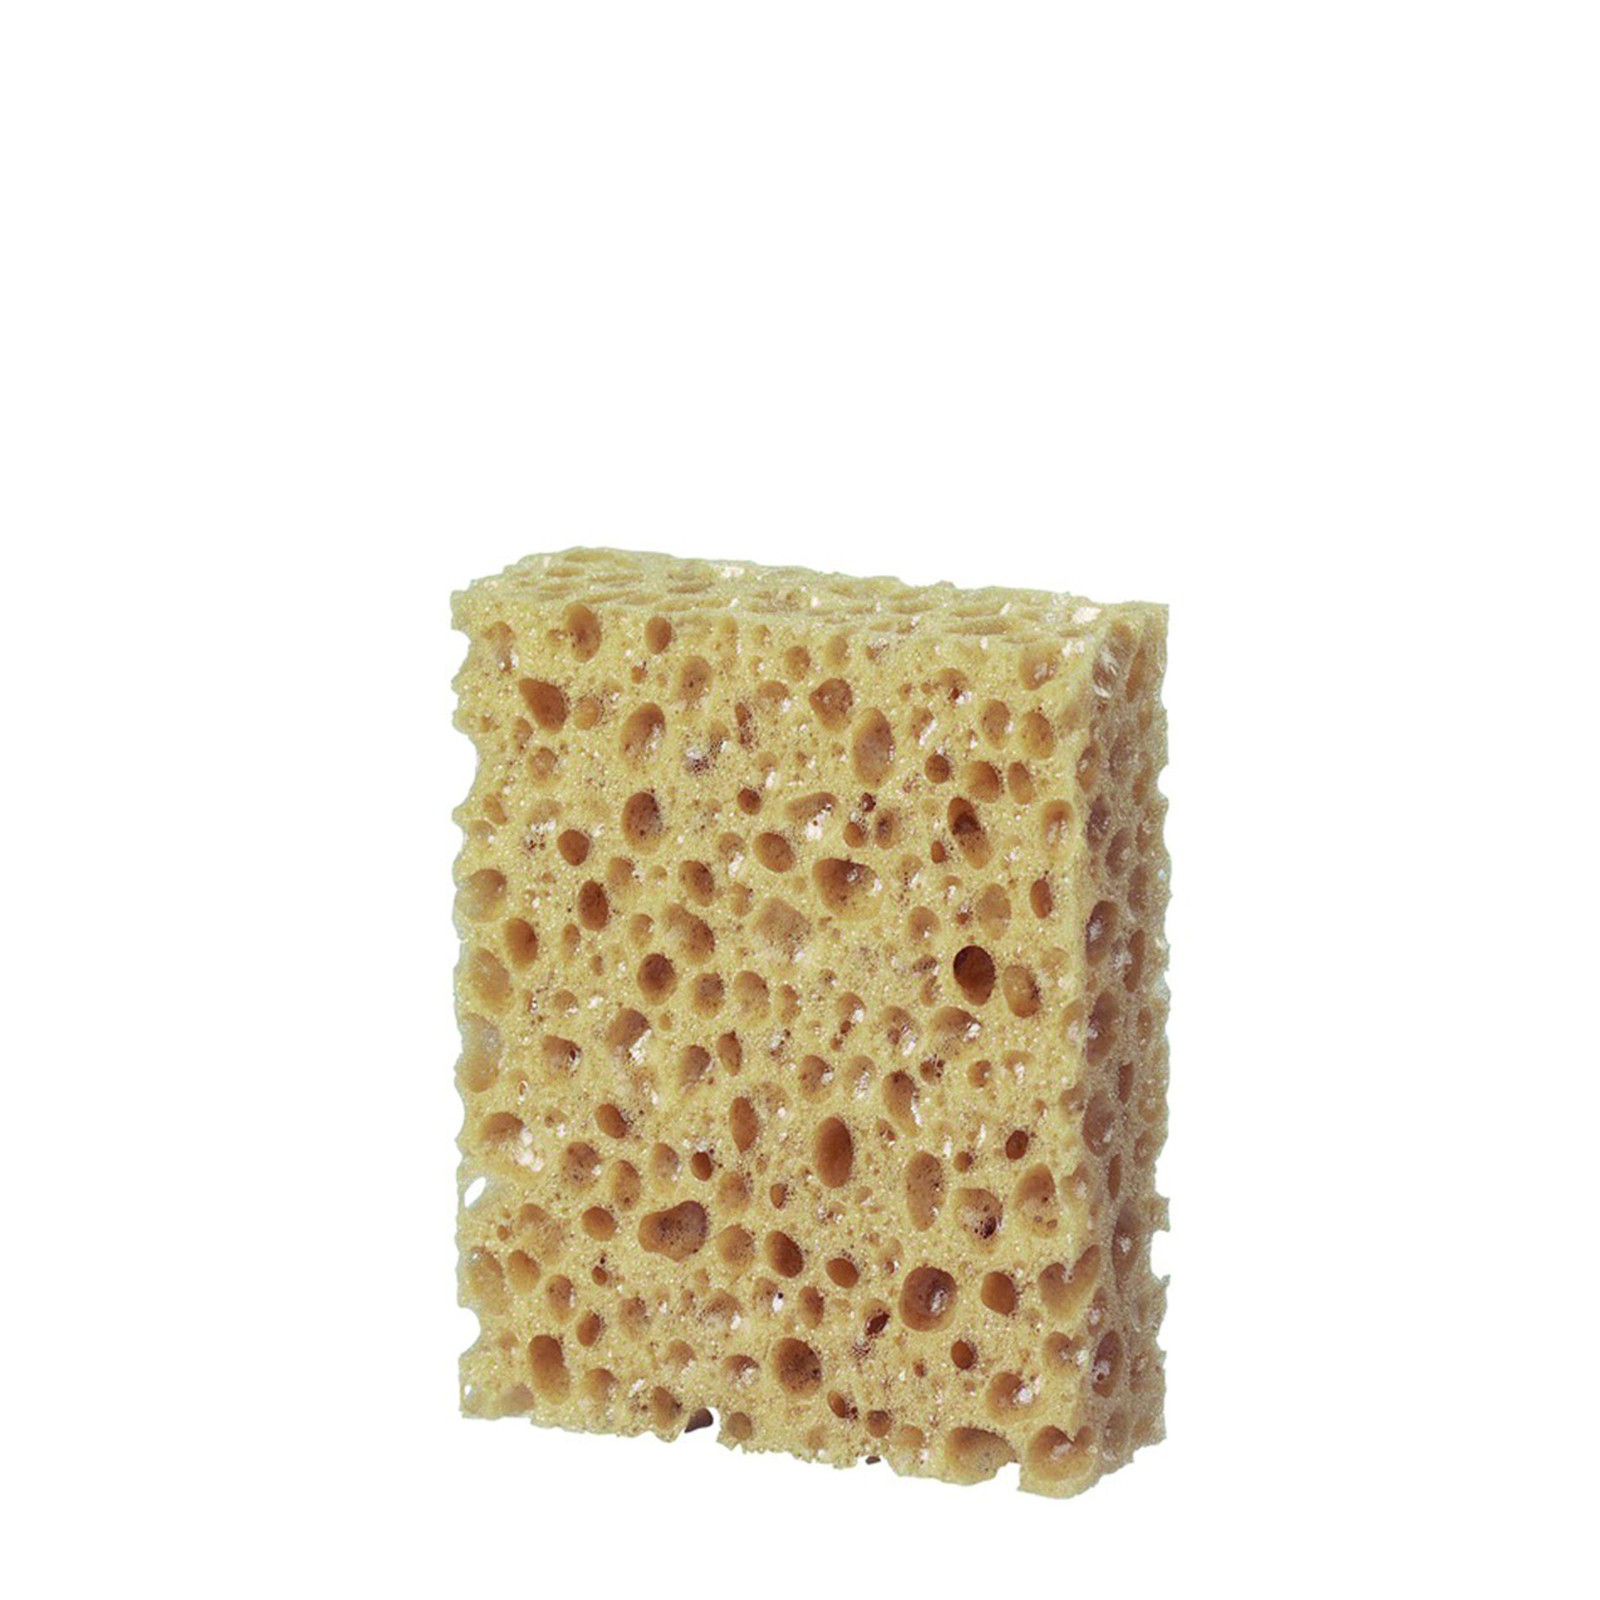 Natural Cleaning Sponge